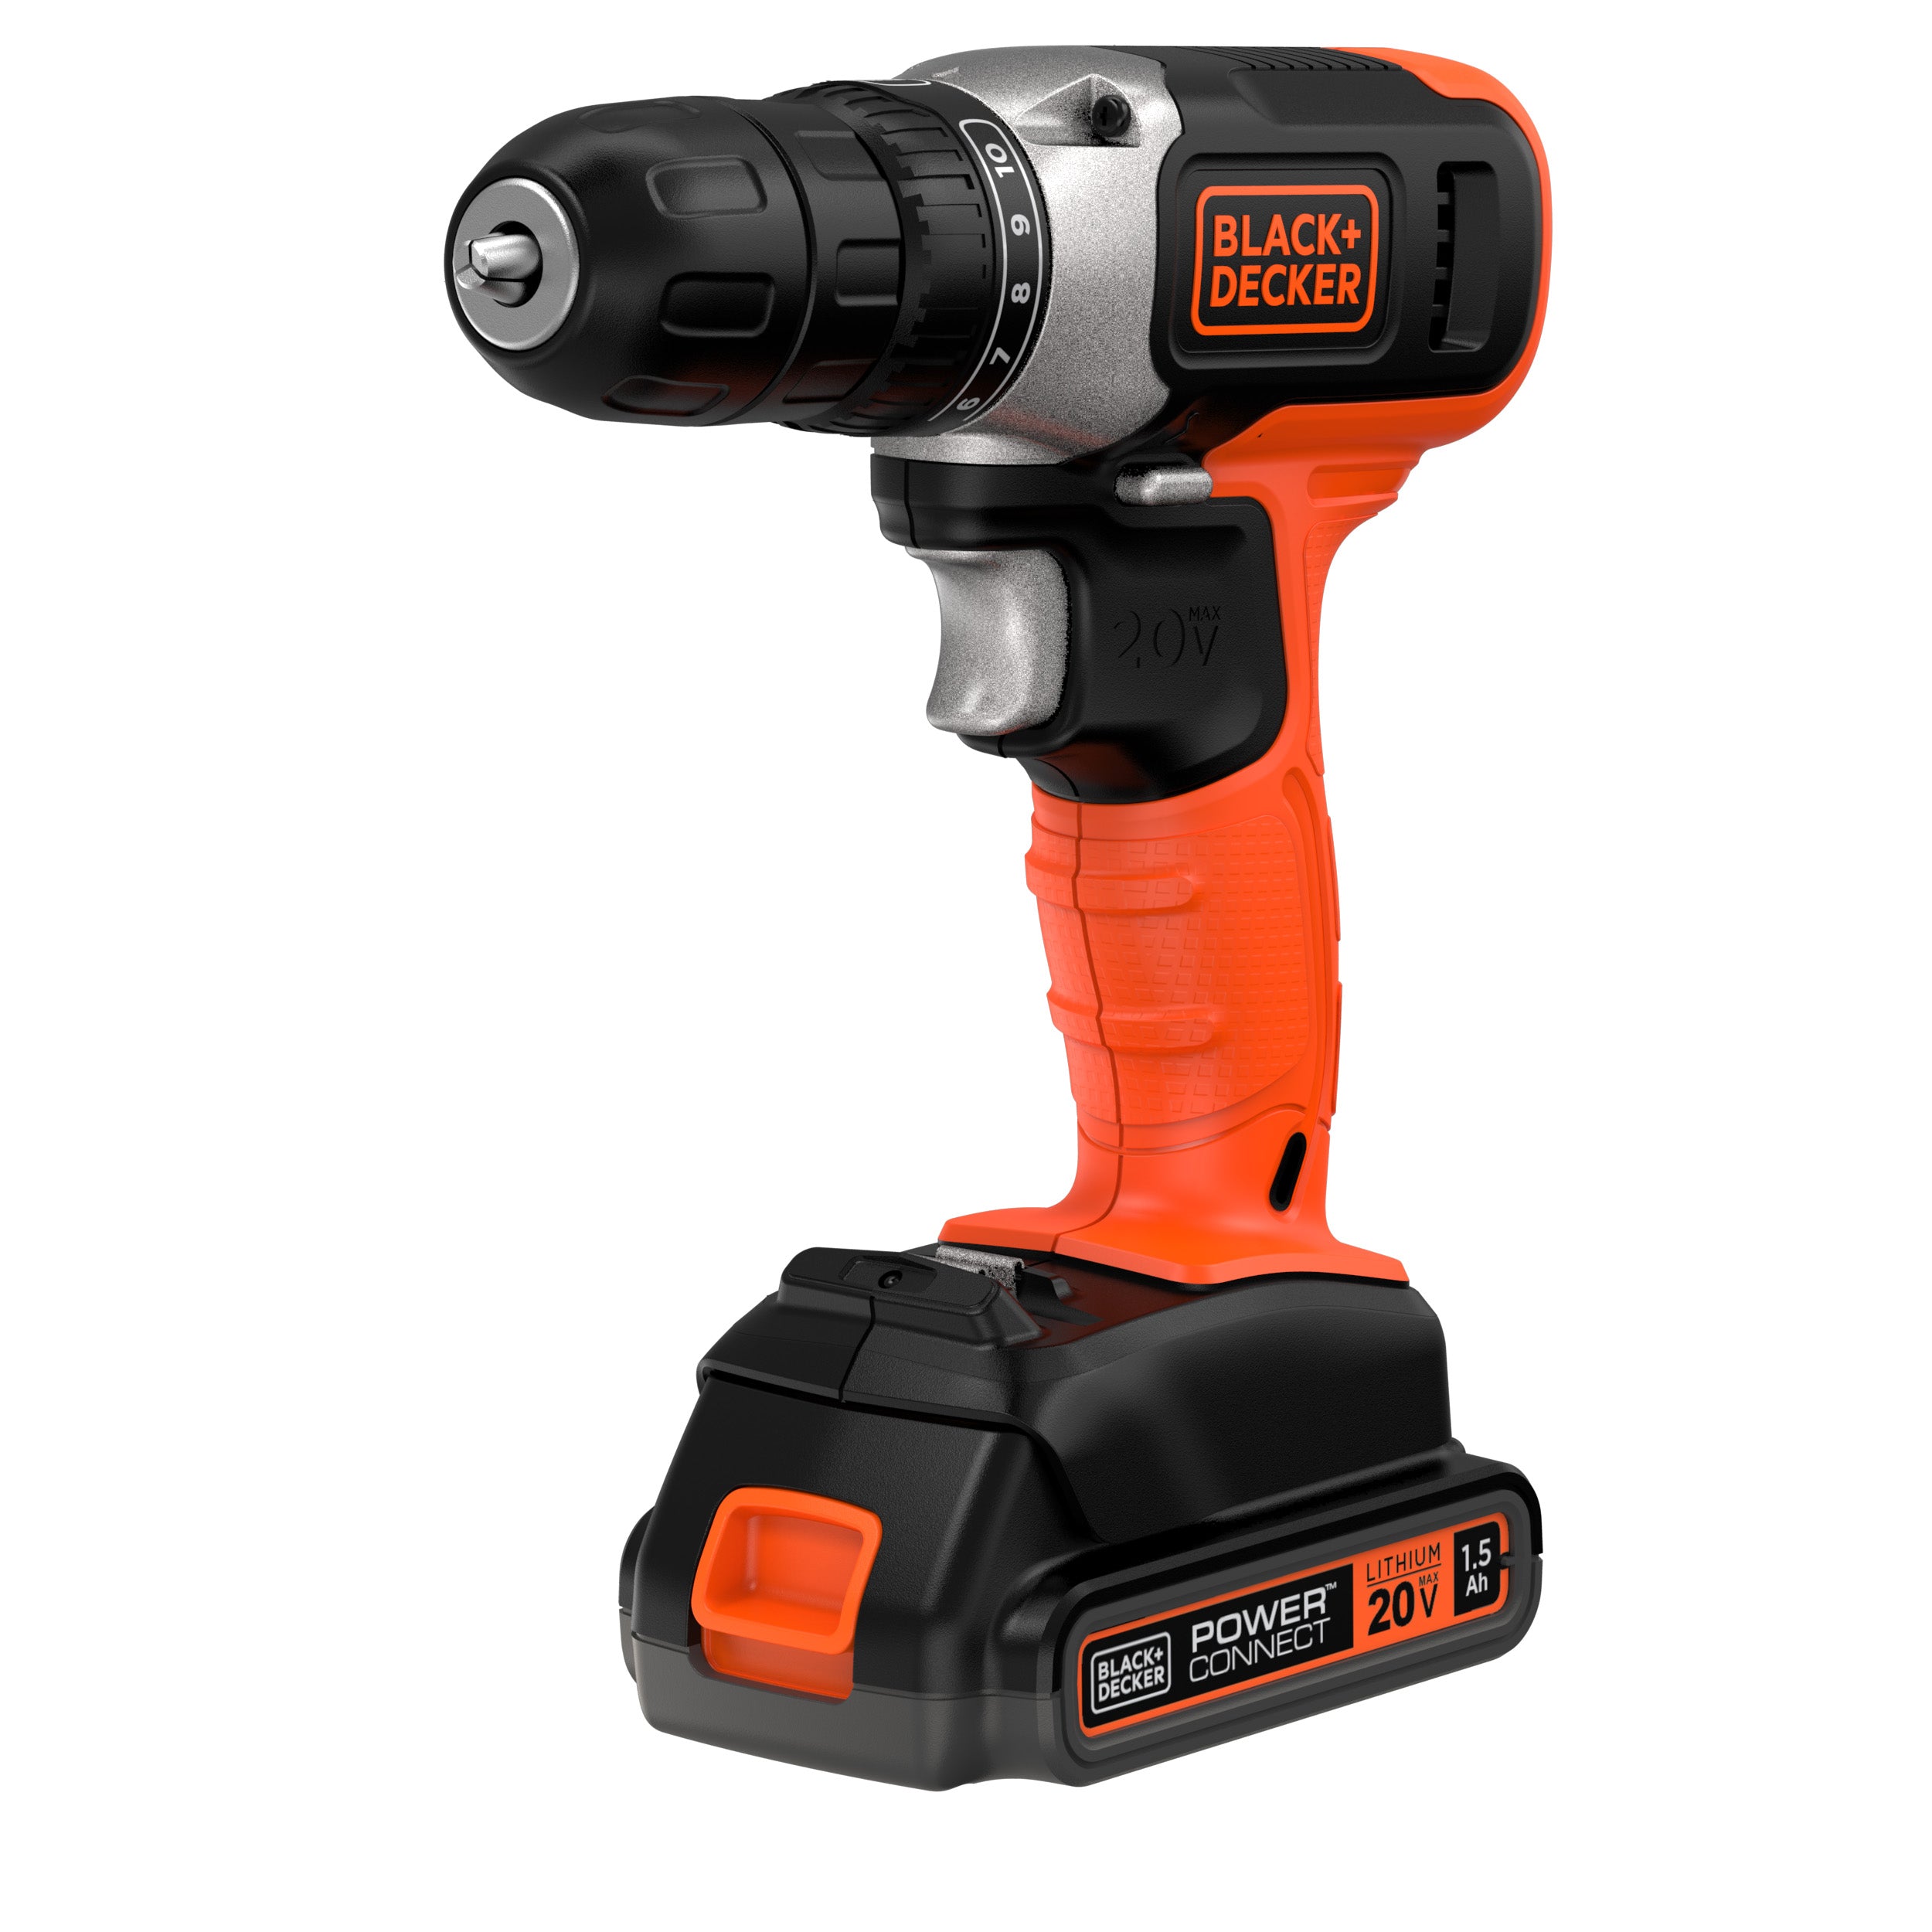  beyond by BLACK+DECKER Home Tool Kit with 20V MAX Drill/Driver,  83-Piece (BDPK70284C1AEV) & by BLACK+DECKER Tool Box Bundle, 19-Inch &  12-Inch (BDST60129AEV) : Tools & Home Improvement